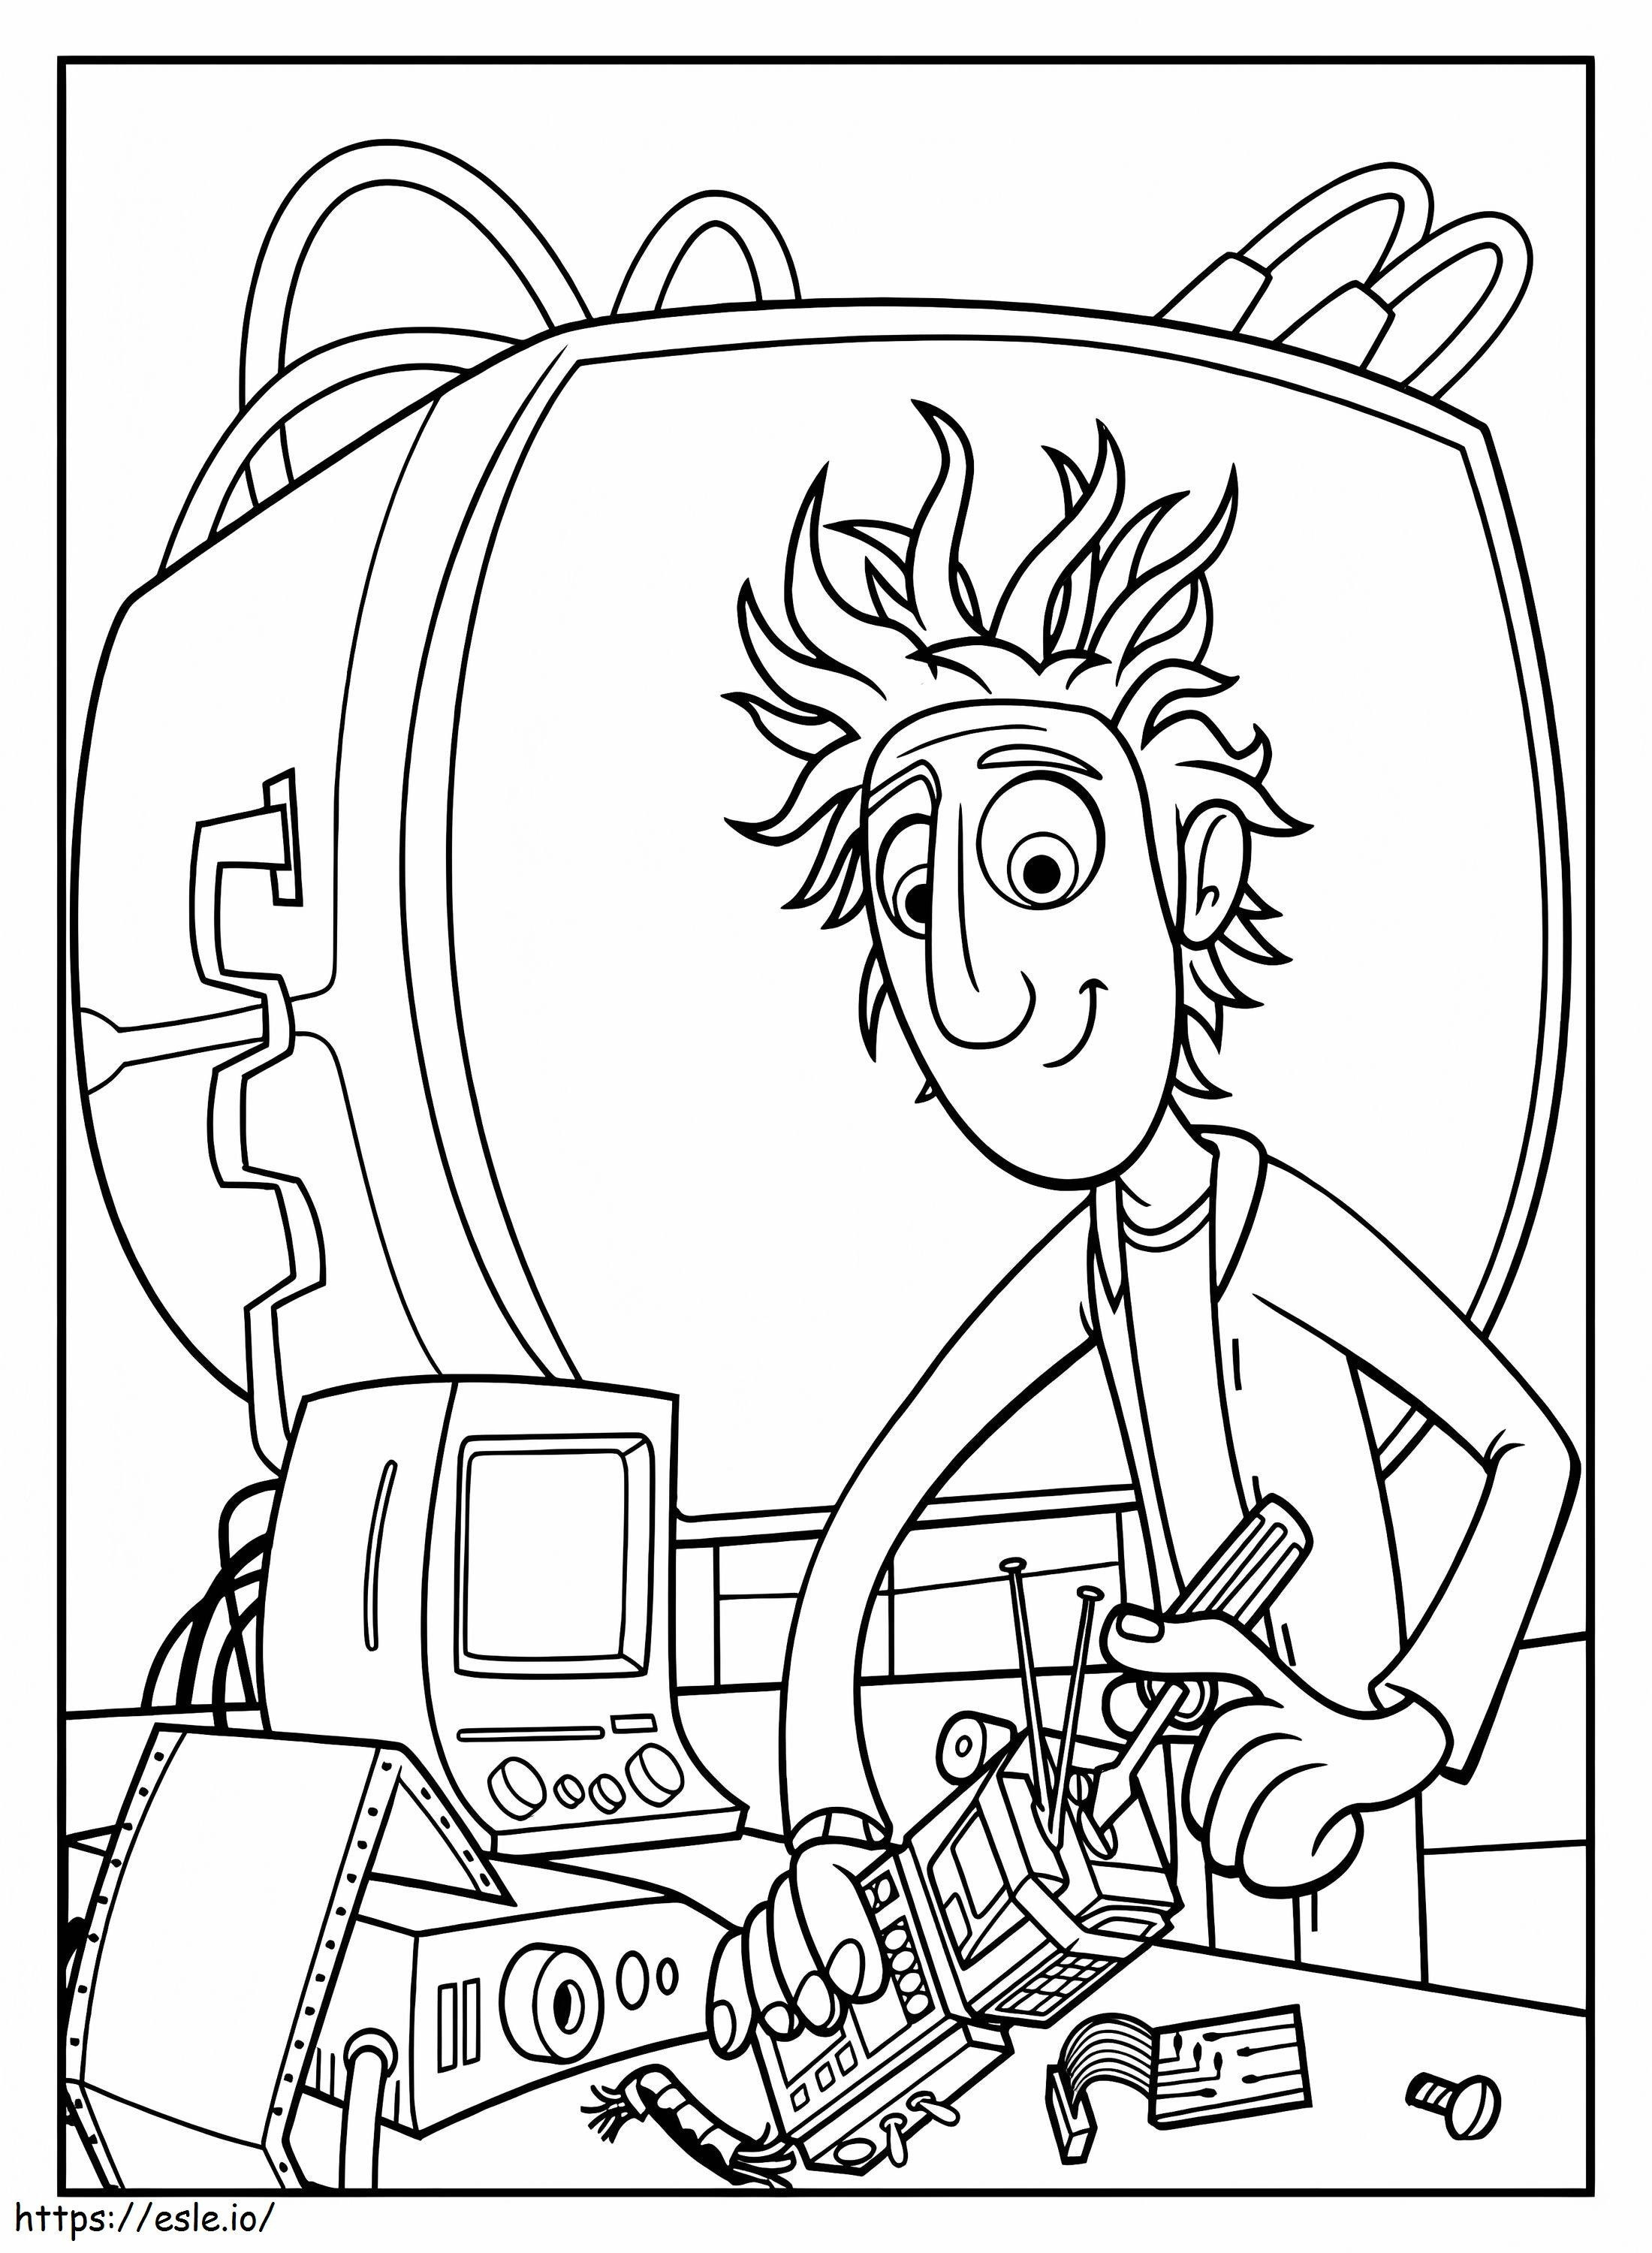 Cloudy With A Chance Of Meatballs 7 coloring page